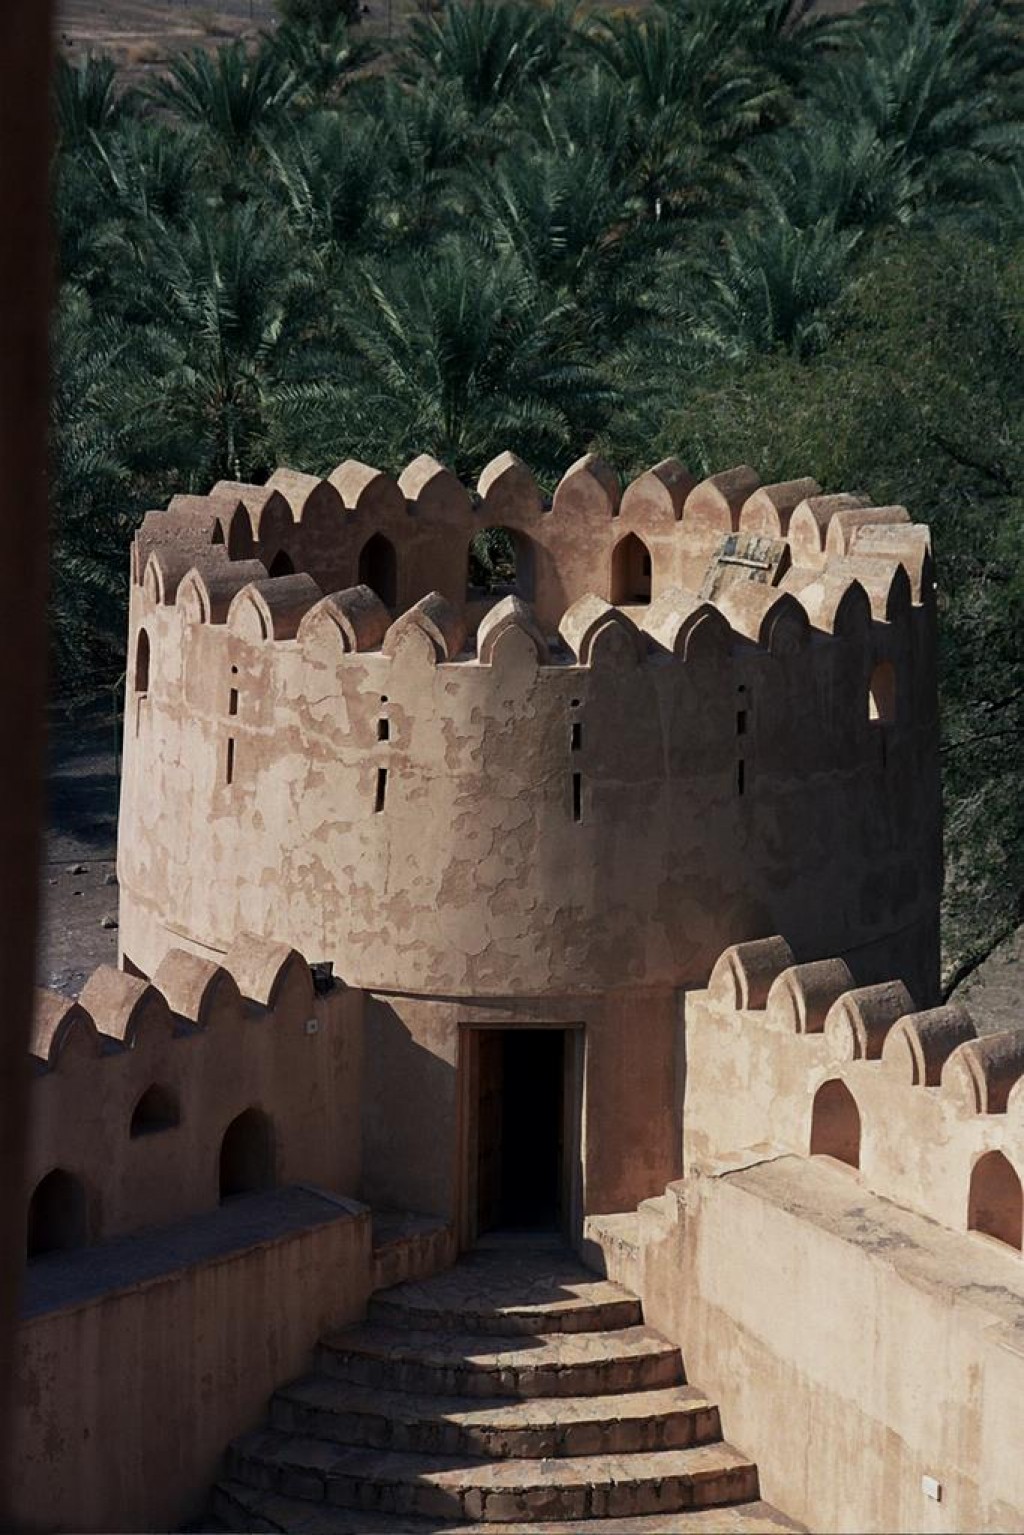 Jabrin Fort rises out of the middle of nowhere in the desert, and wows even the most jaded fort visitor.